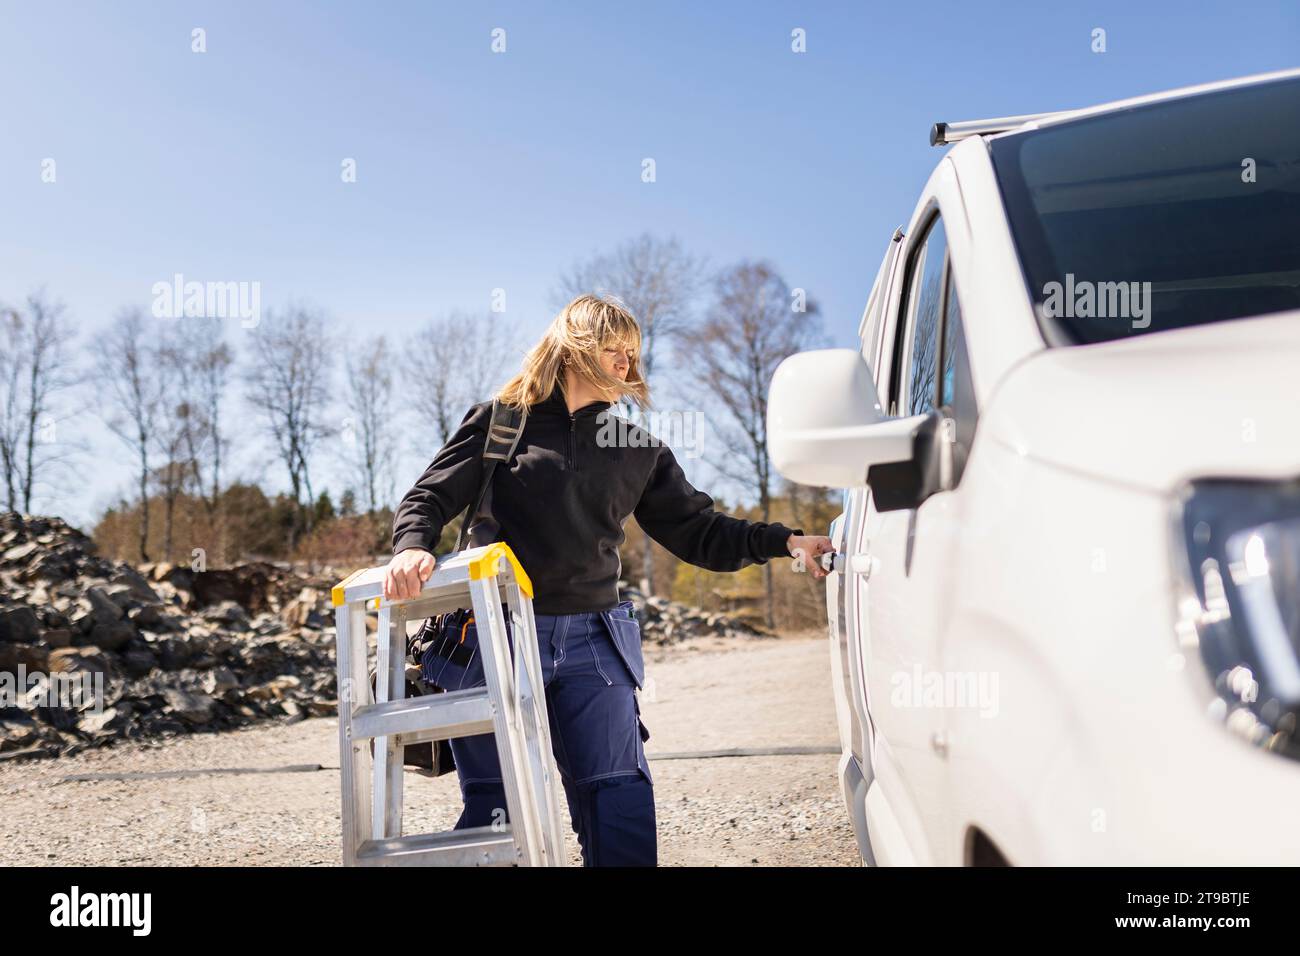 Female electrician with ladder opening van's door standing on sunny day Stock Photo